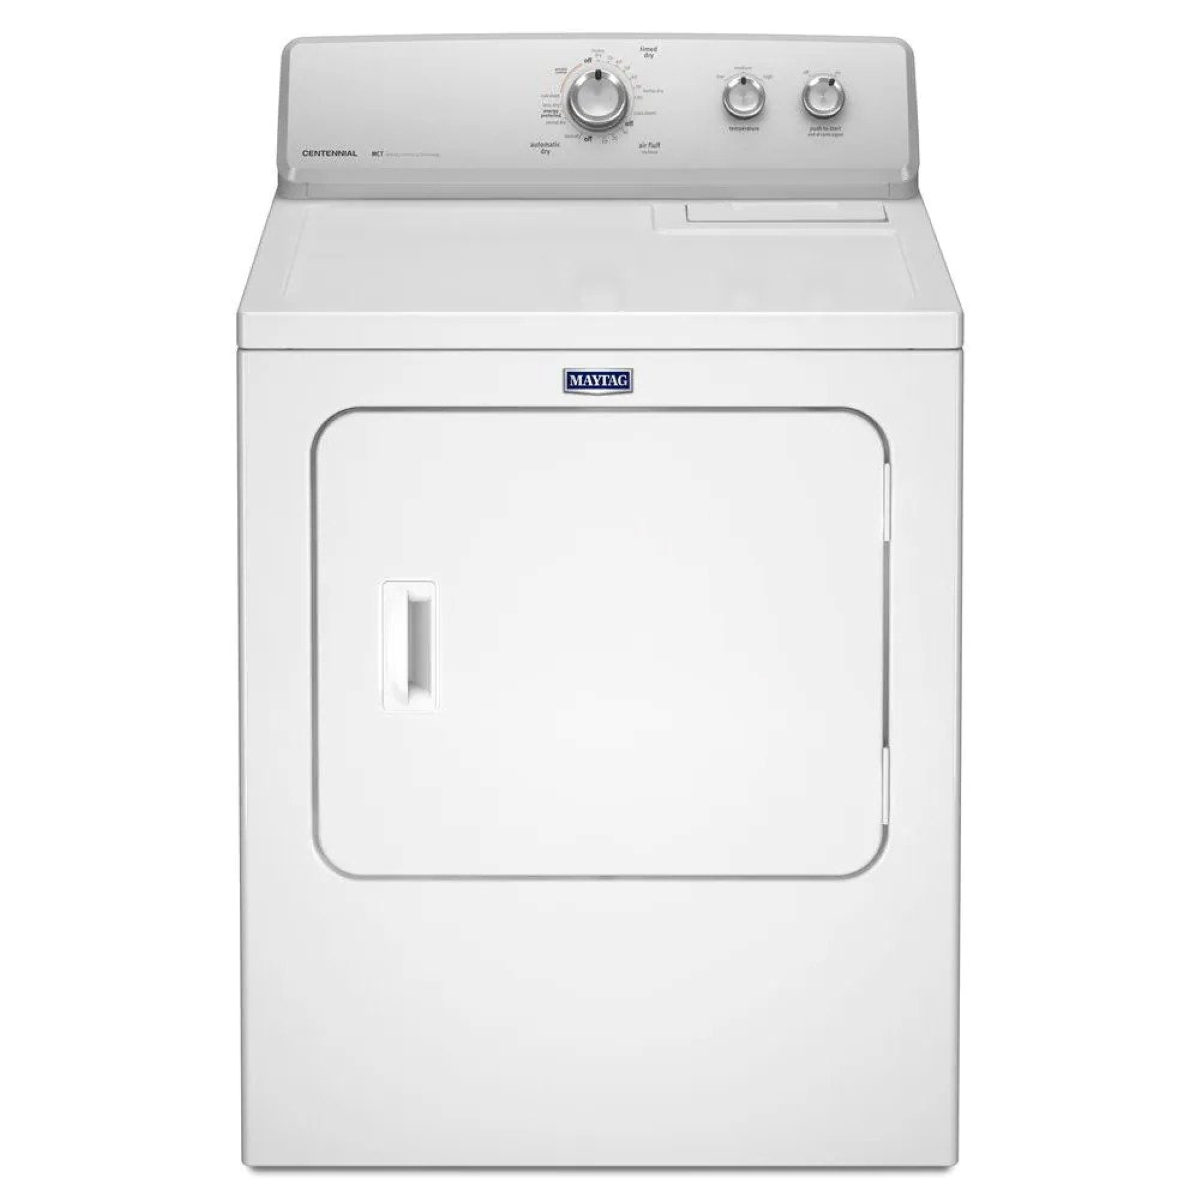 How To Fix The Error Code F71 For Maytag Dryer